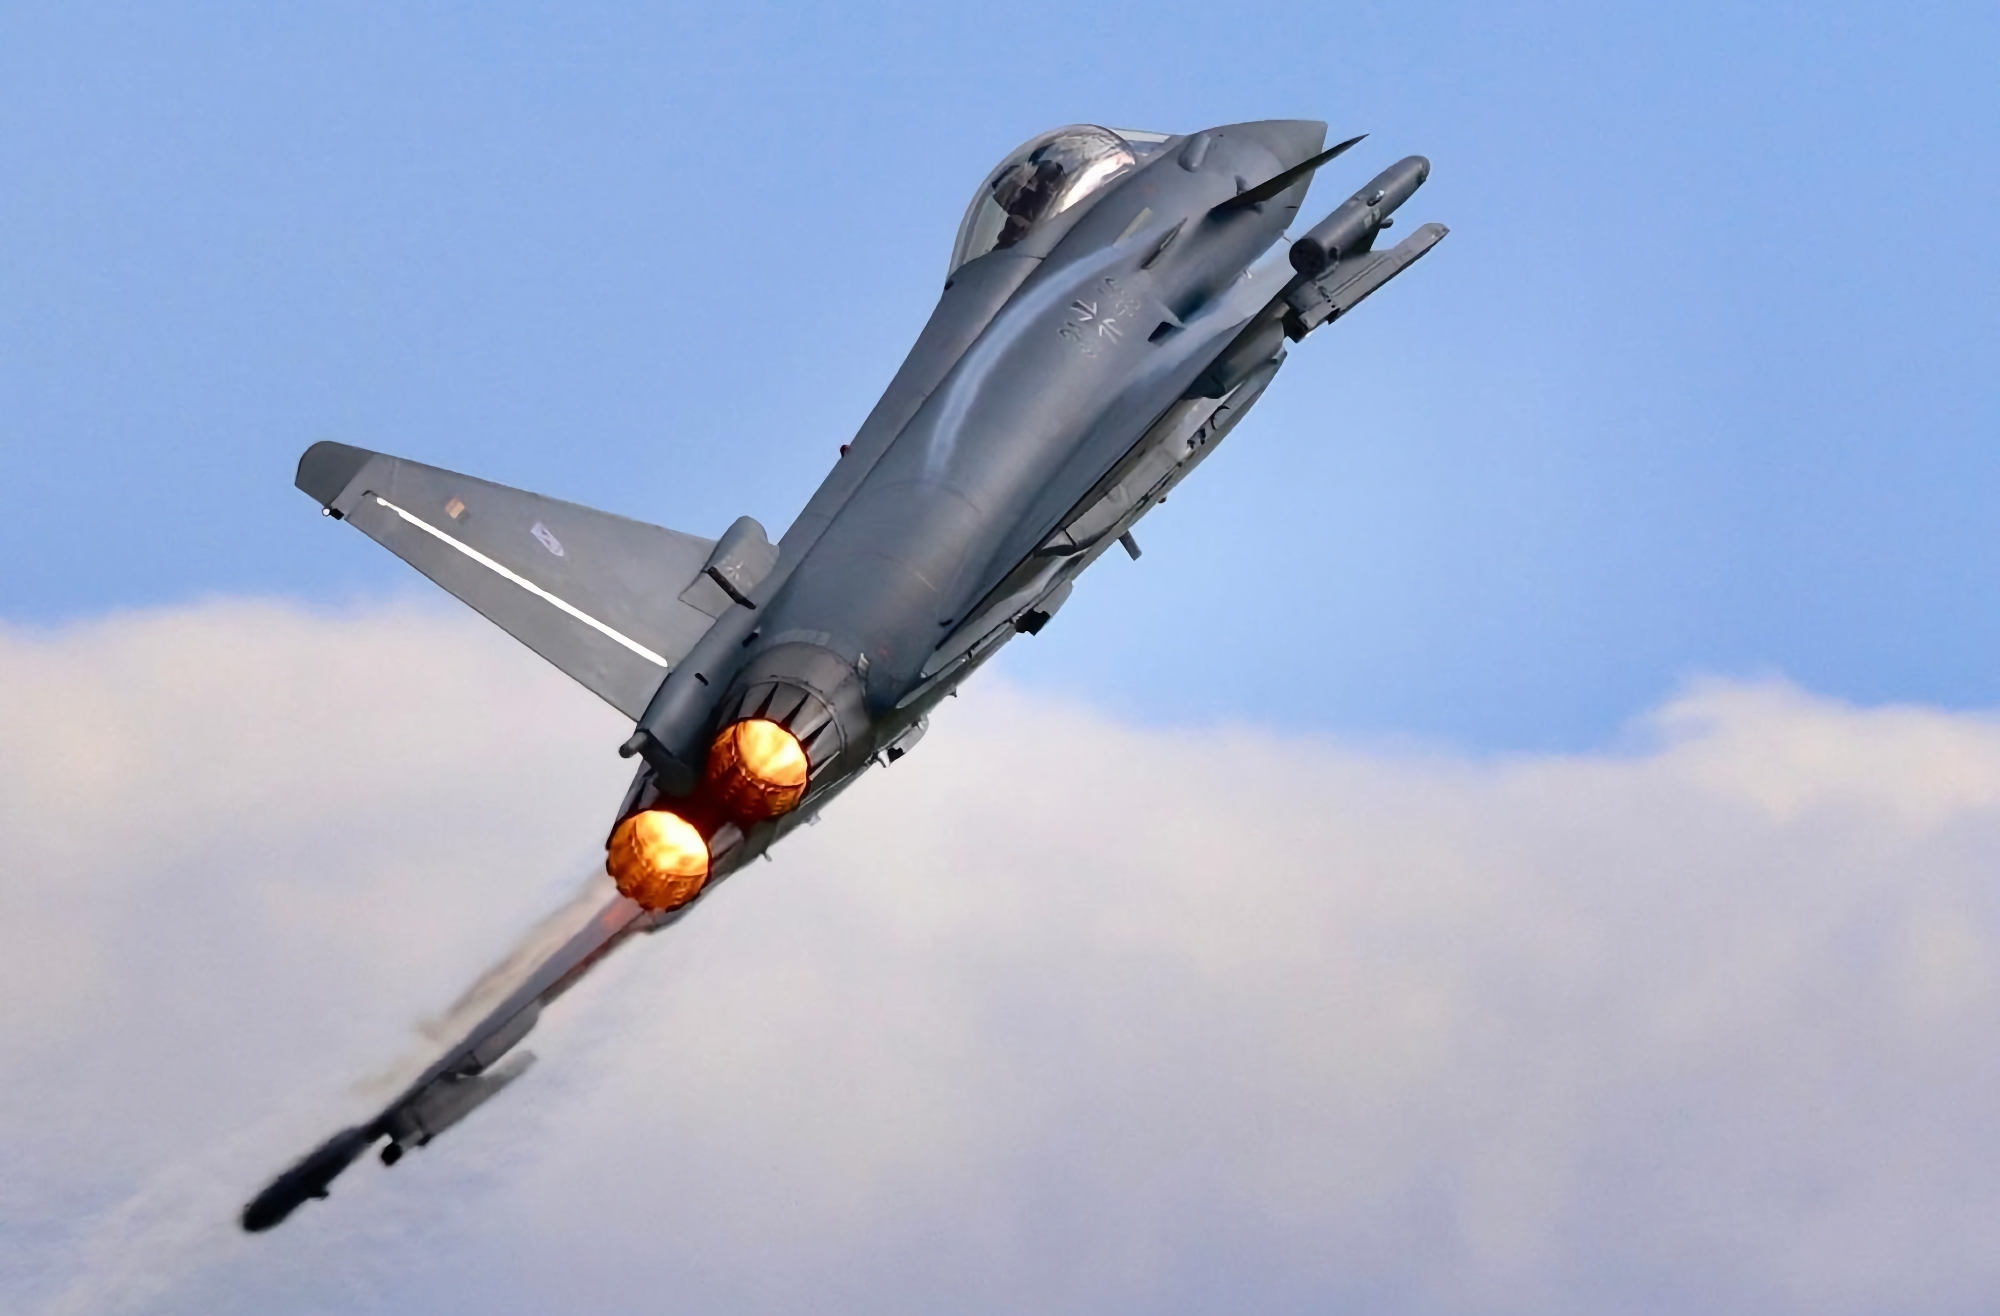 Germany to buy 20 additional Eurofighter Typhoon aircraft